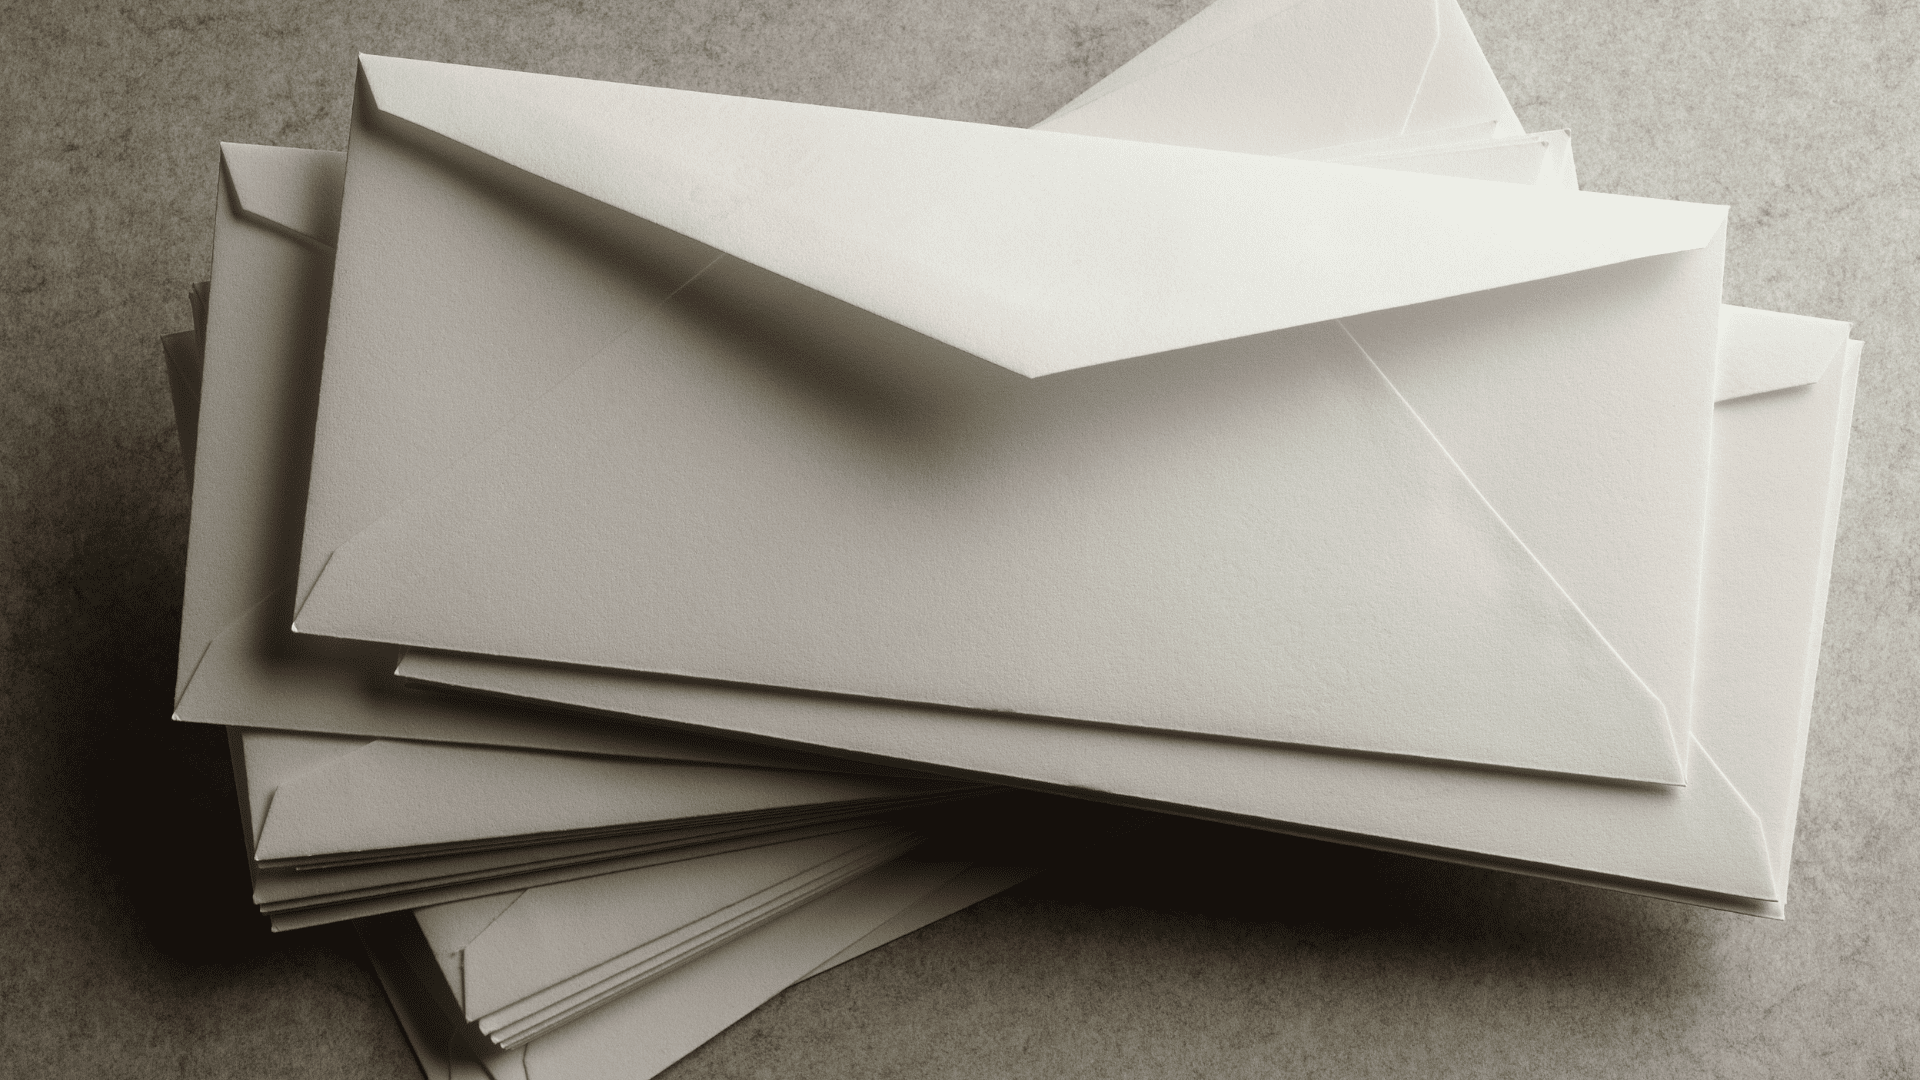 Small stack of unsealed envelopes